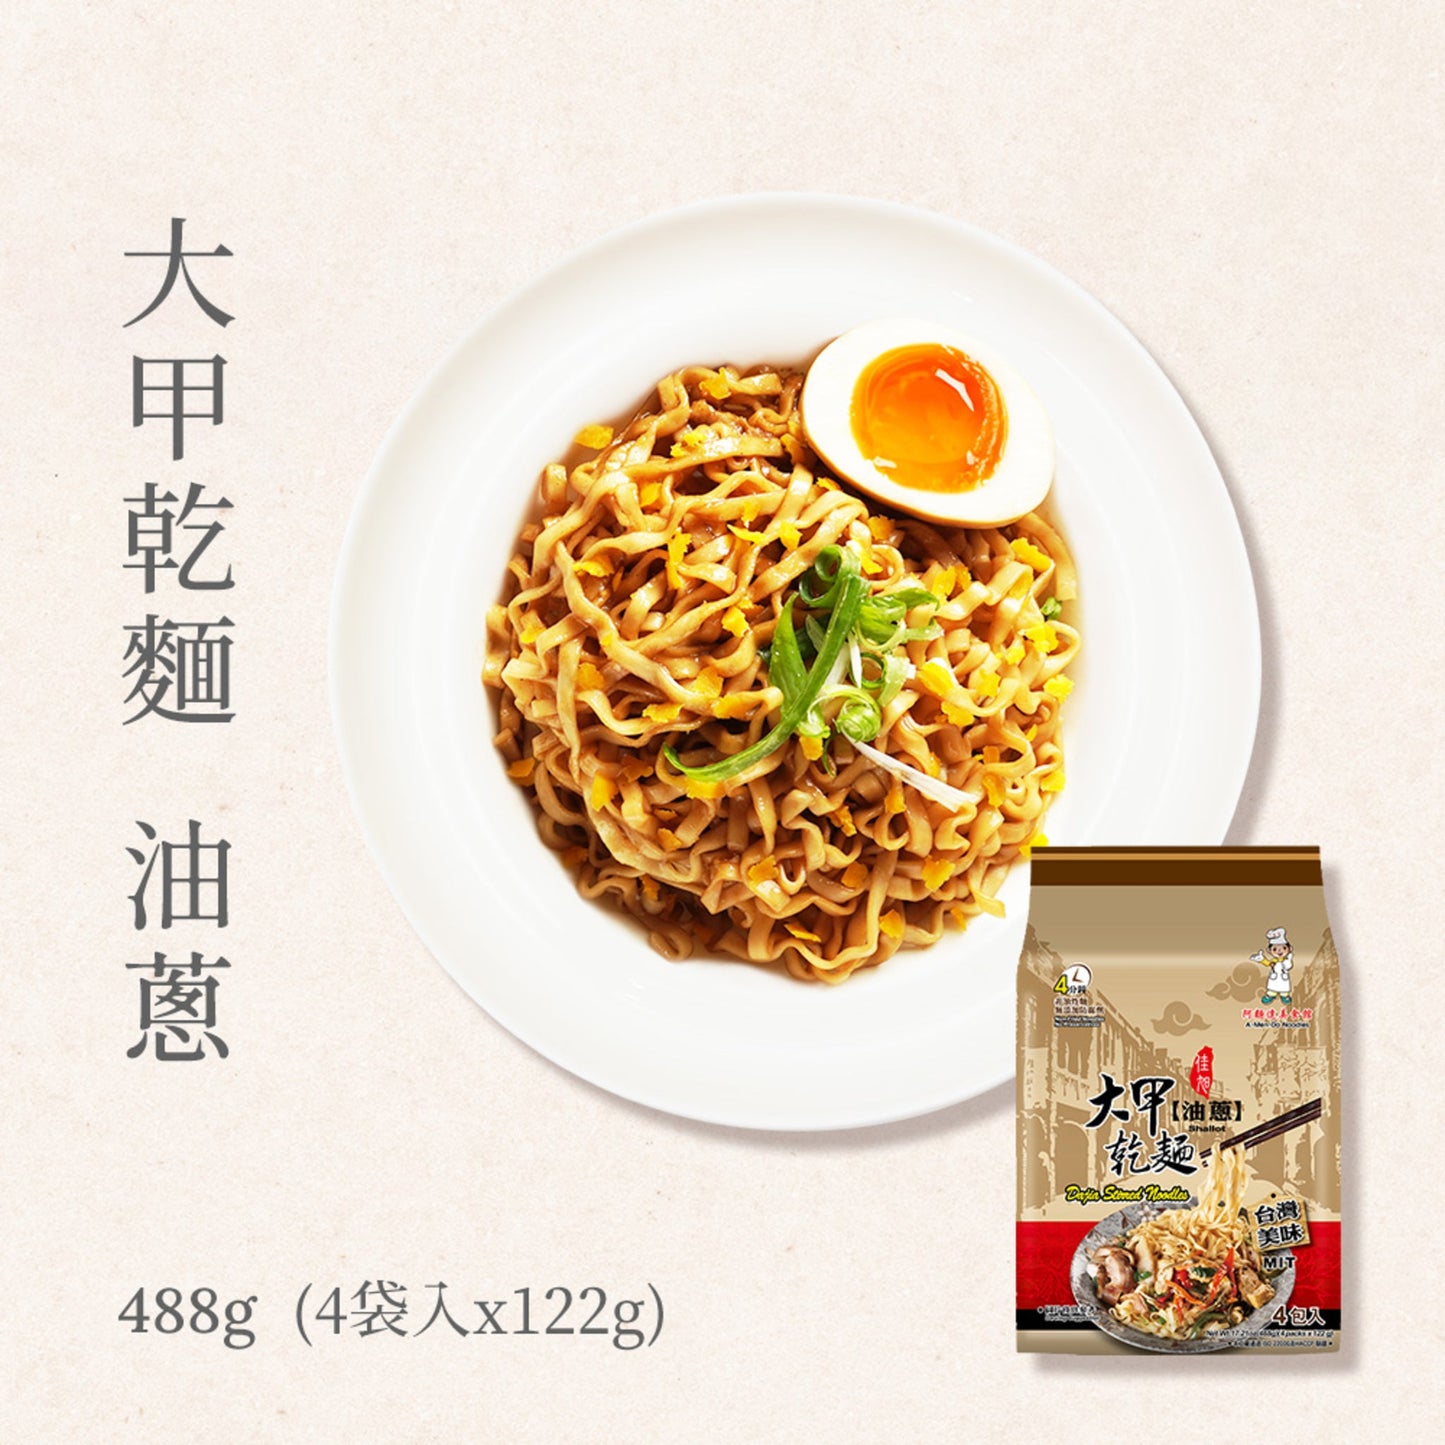 Dajia Stirred Noodles - Shallot Sauce (Pack of 4) 大甲乾麵-油蔥 4包